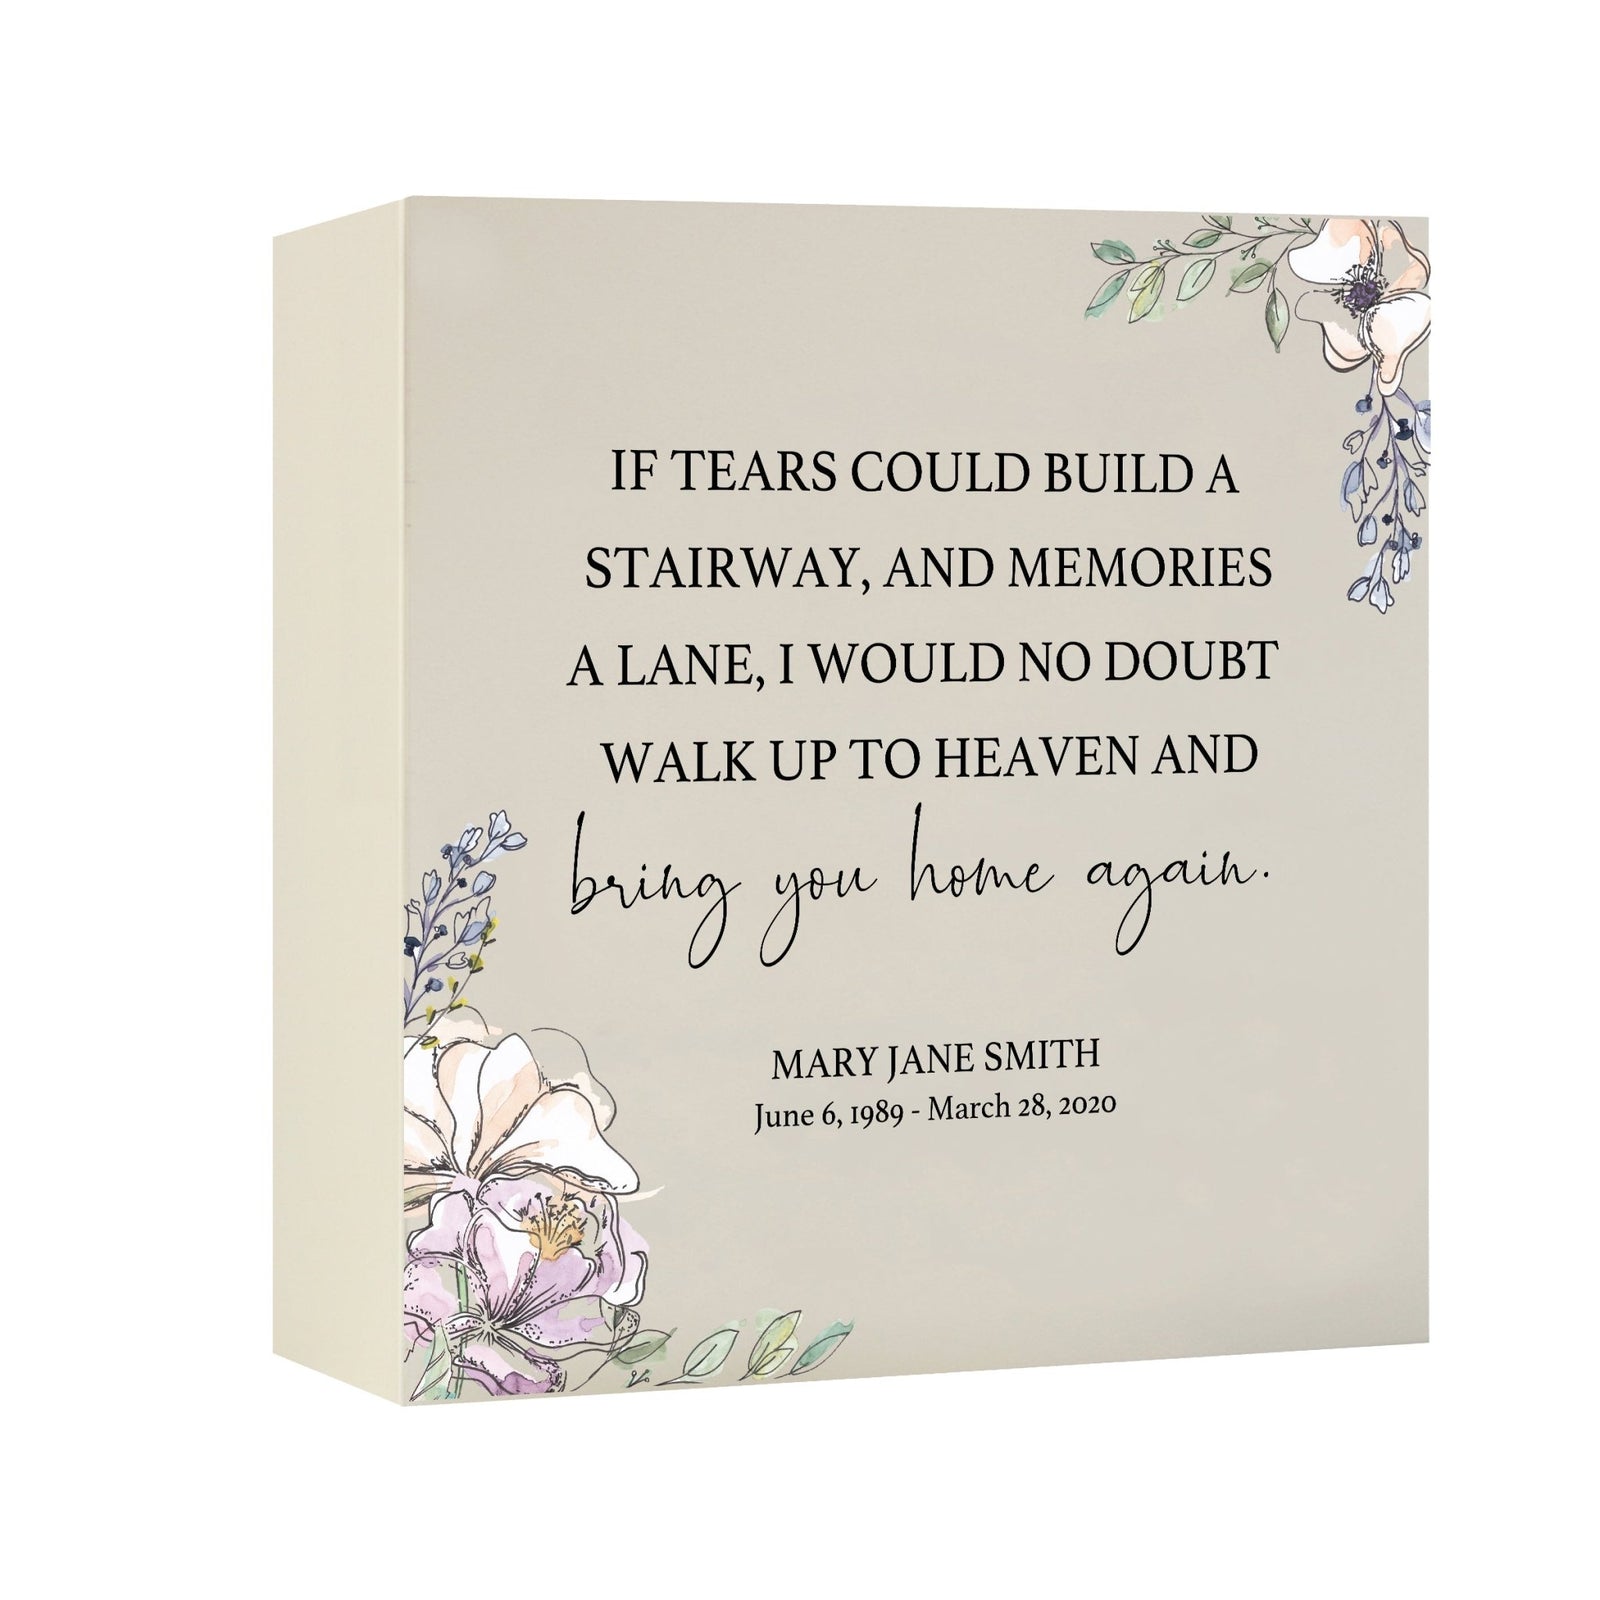 Timeless Human Memorial Shadow Box Urn With Inspirational Verse in Ivory - If Tears Could Build Stairway - LifeSong Milestones